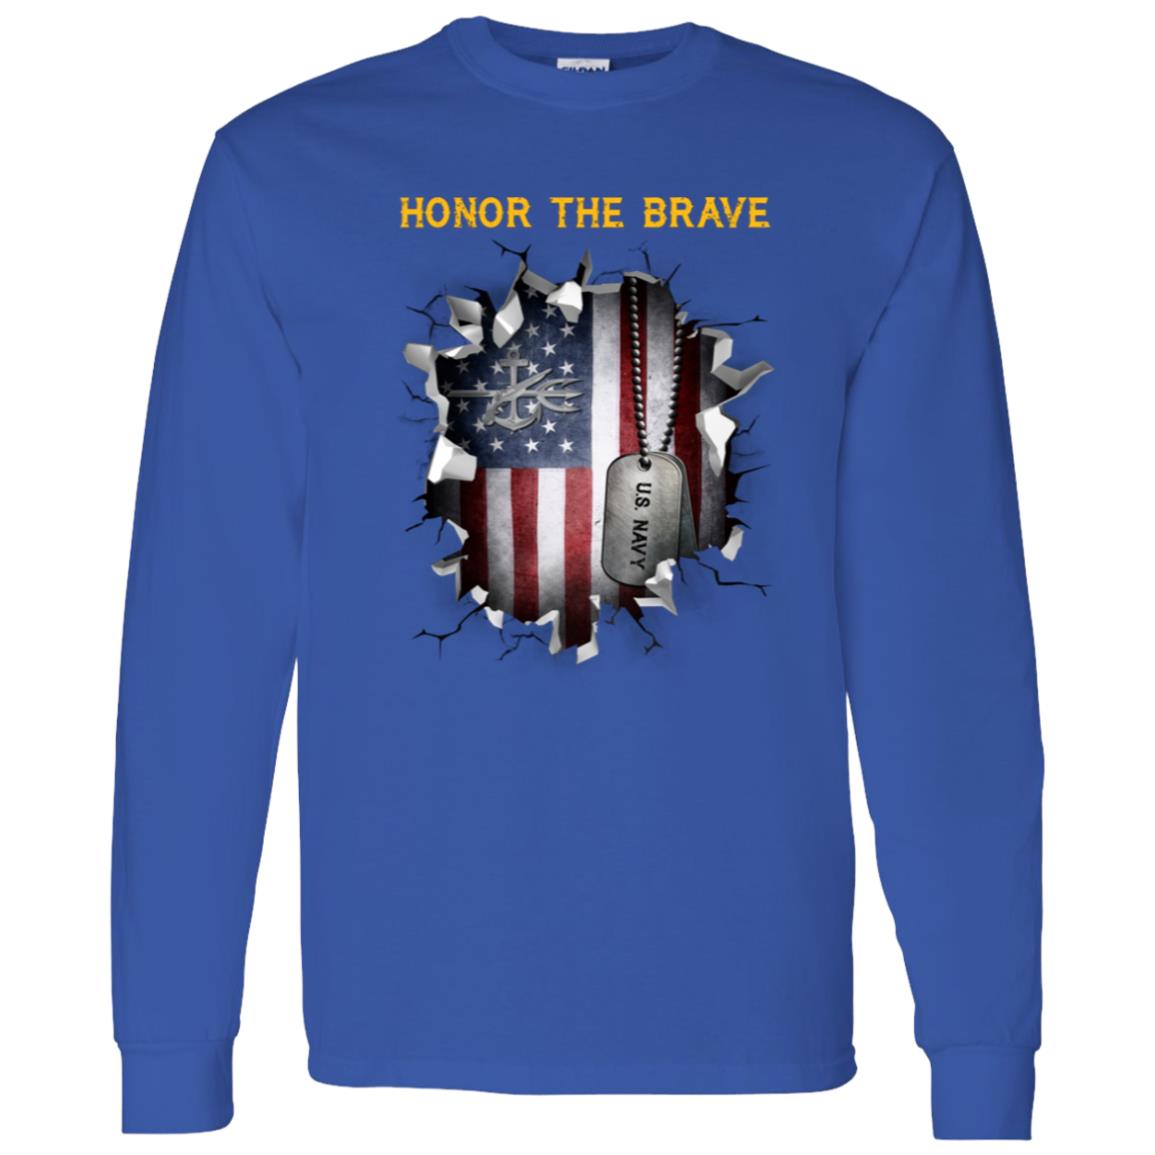 Navy Special Warfare Operator Navy SO - Honor The Brave Front Shirt